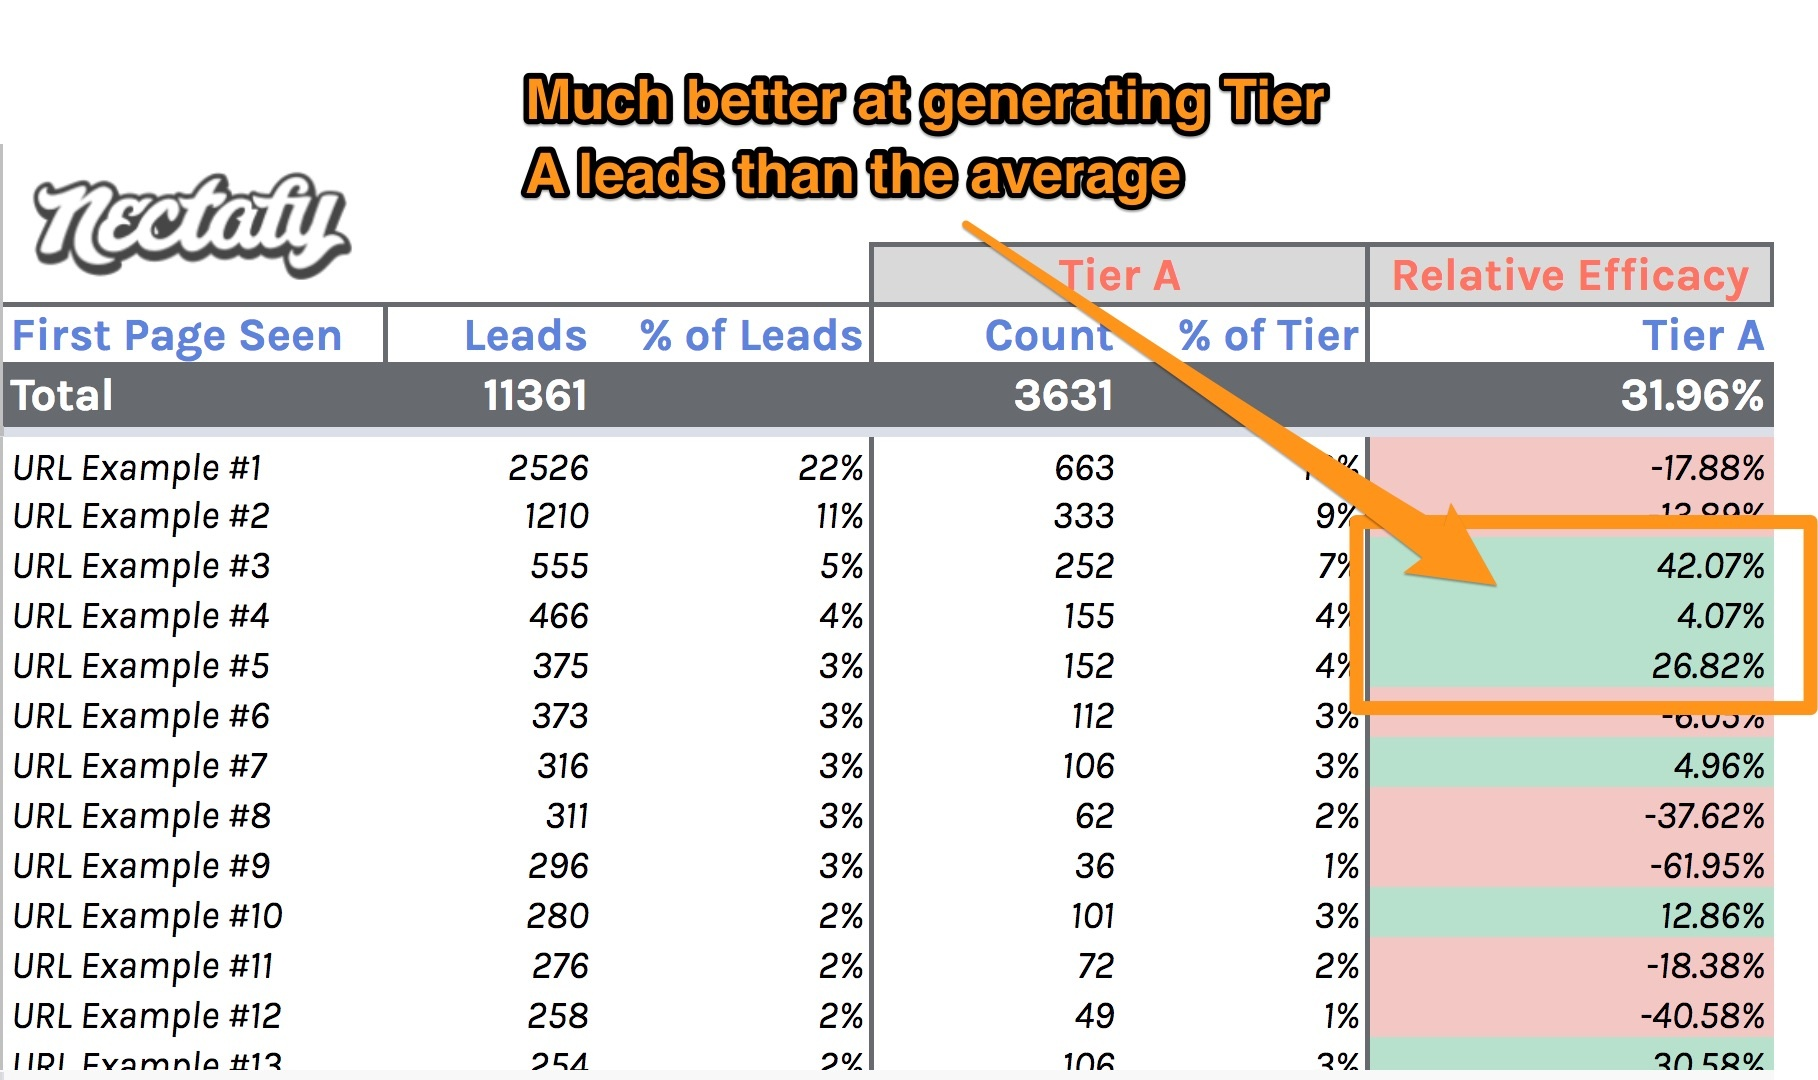 Much better at generating Tier A leads than the average